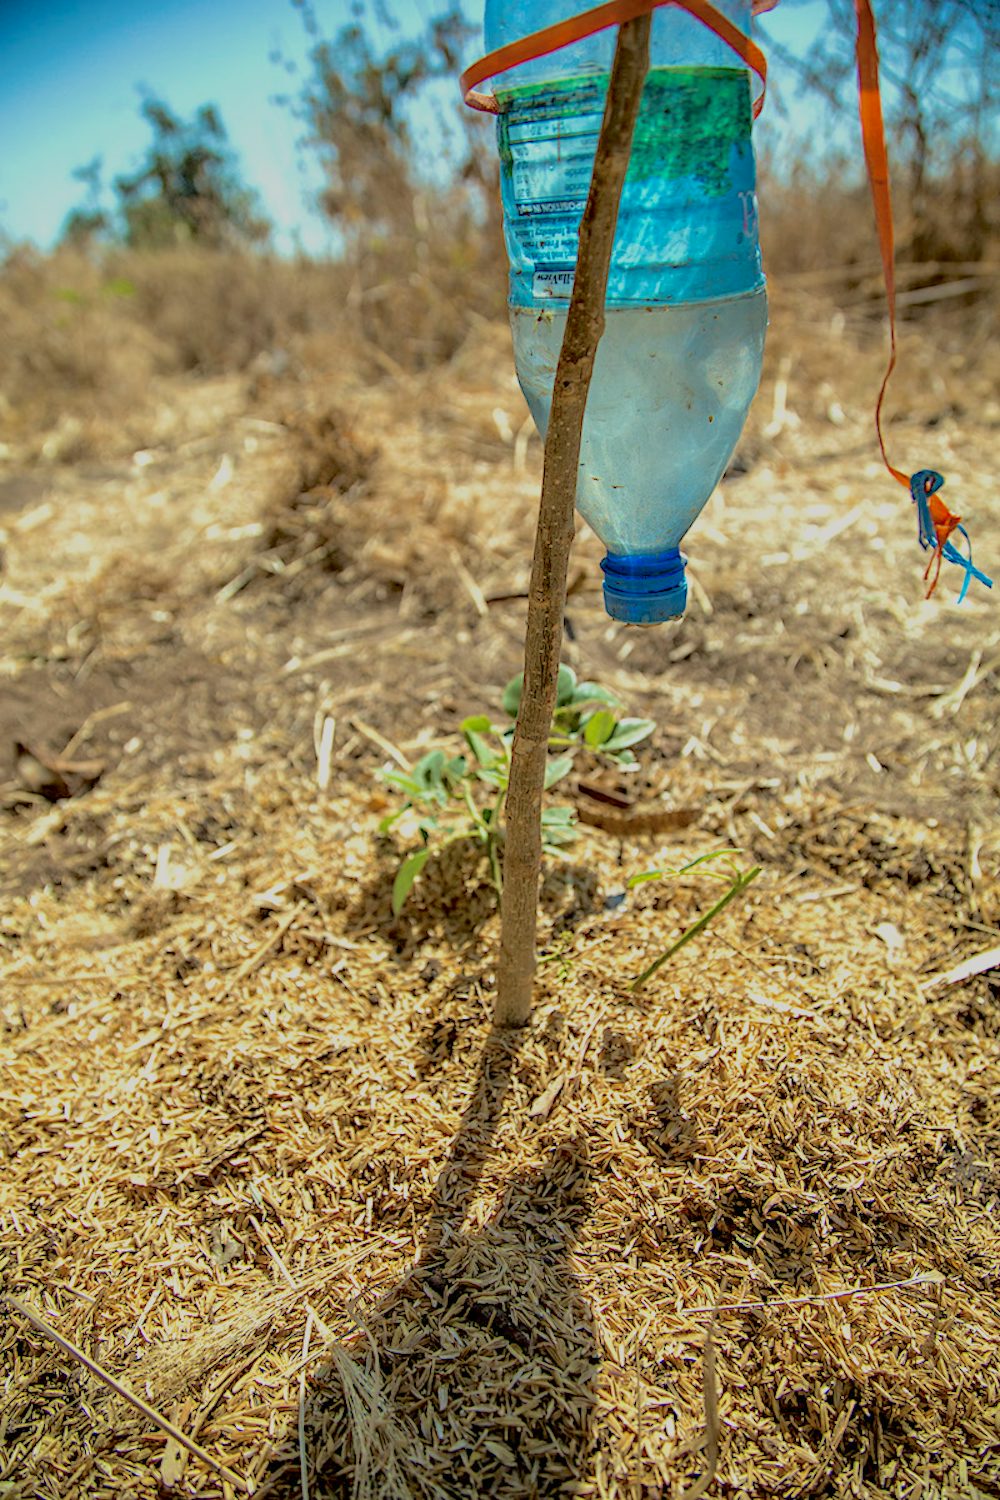 A drip irrigator made from a recycled, plastic bottle waters a sapling